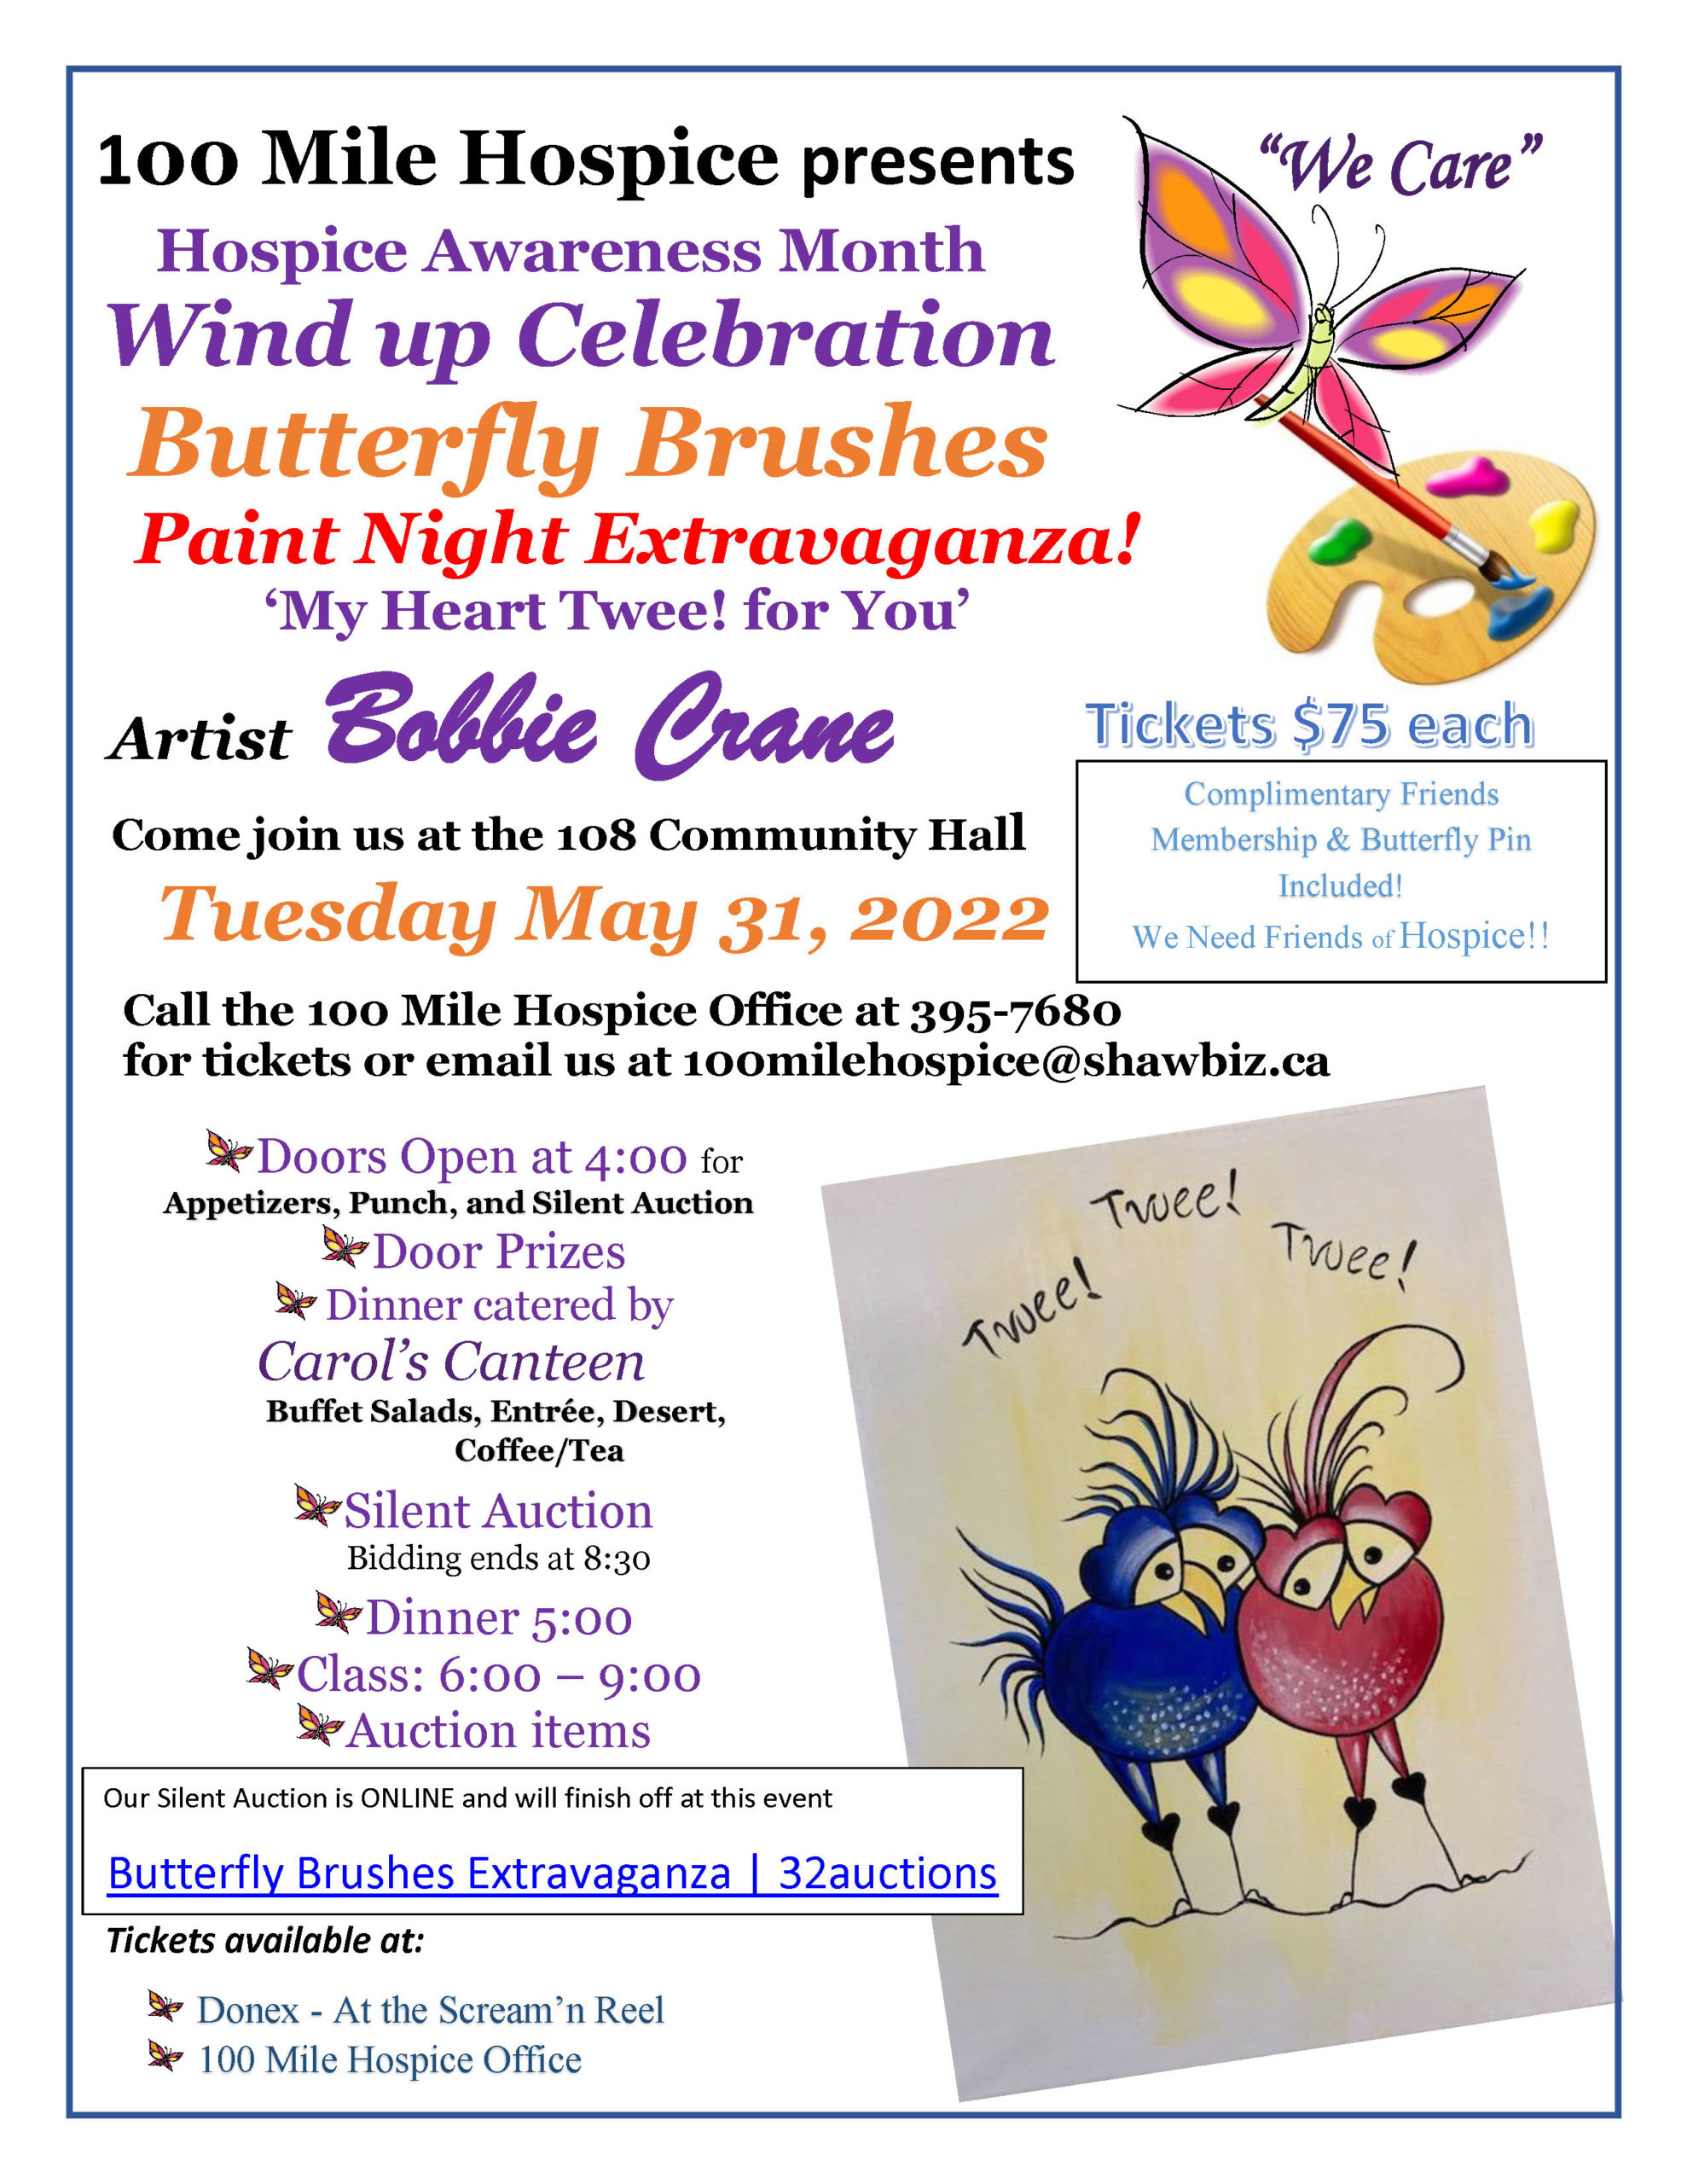 Butterfly Brushes Extravaganza & Silent Auction